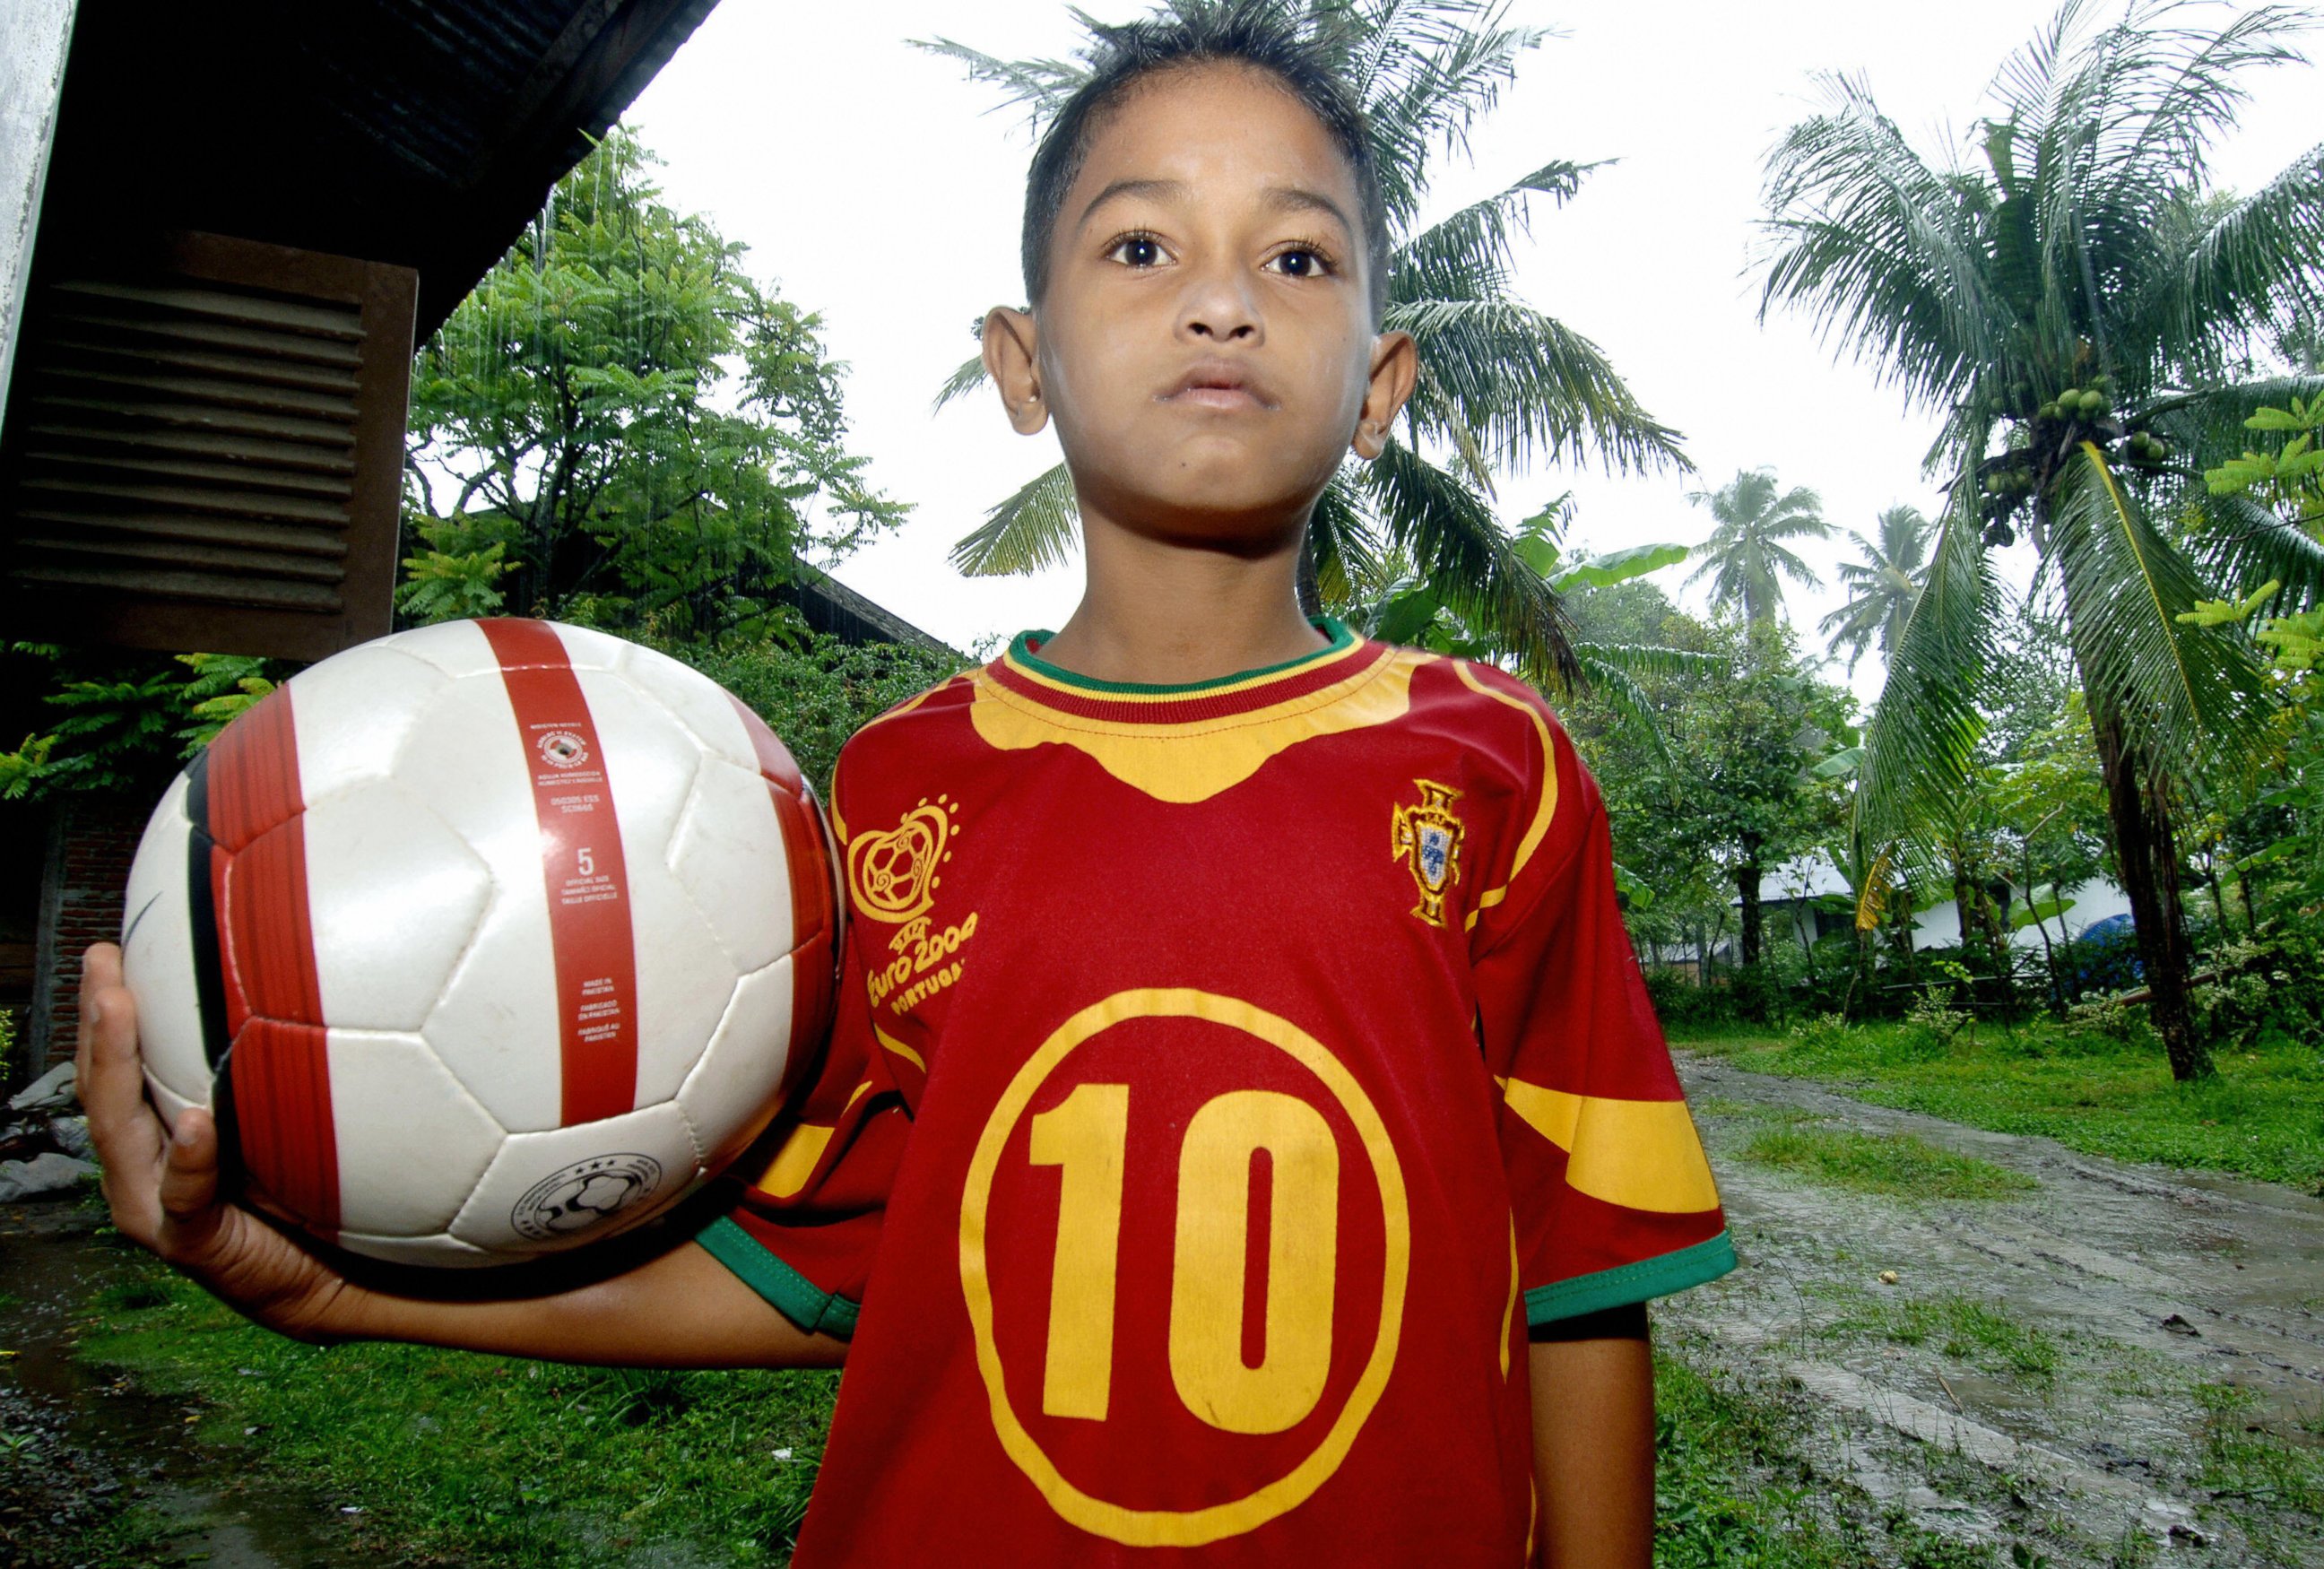 PHOTO: This picture taken by Nov. 30, 2005 shows seven-year old Martunis waiting for rain to stop as he poses with his football at his grandmother's house in Banda Aceh.